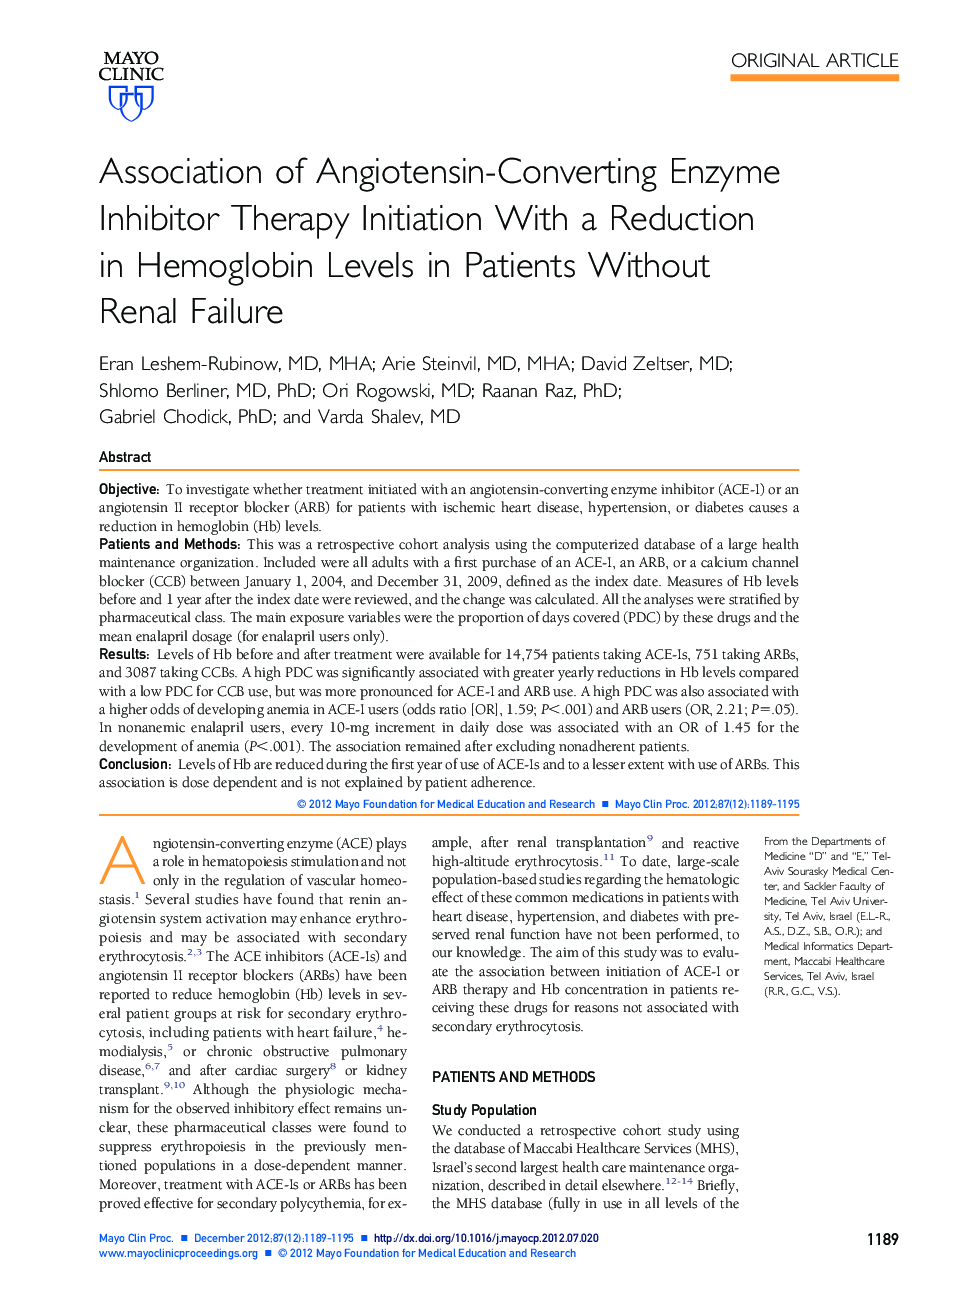 Association of Angiotensin-Converting Enzyme Inhibitor Therapy Initiation With a Reduction in Hemoglobin Levels in Patients Without Renal Failure